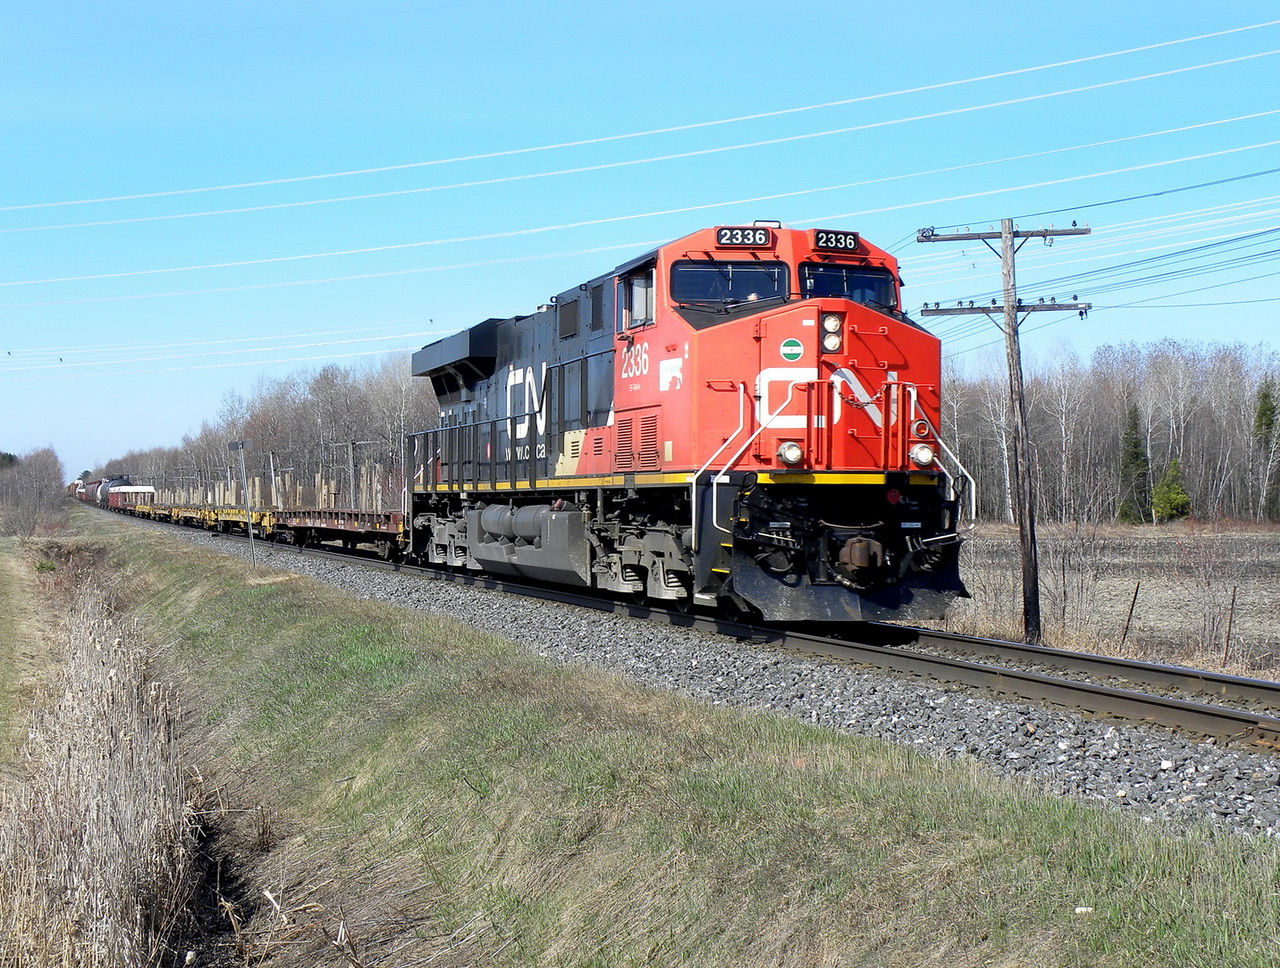 CN 310 with 8925 in mid train at speed through Aston east.